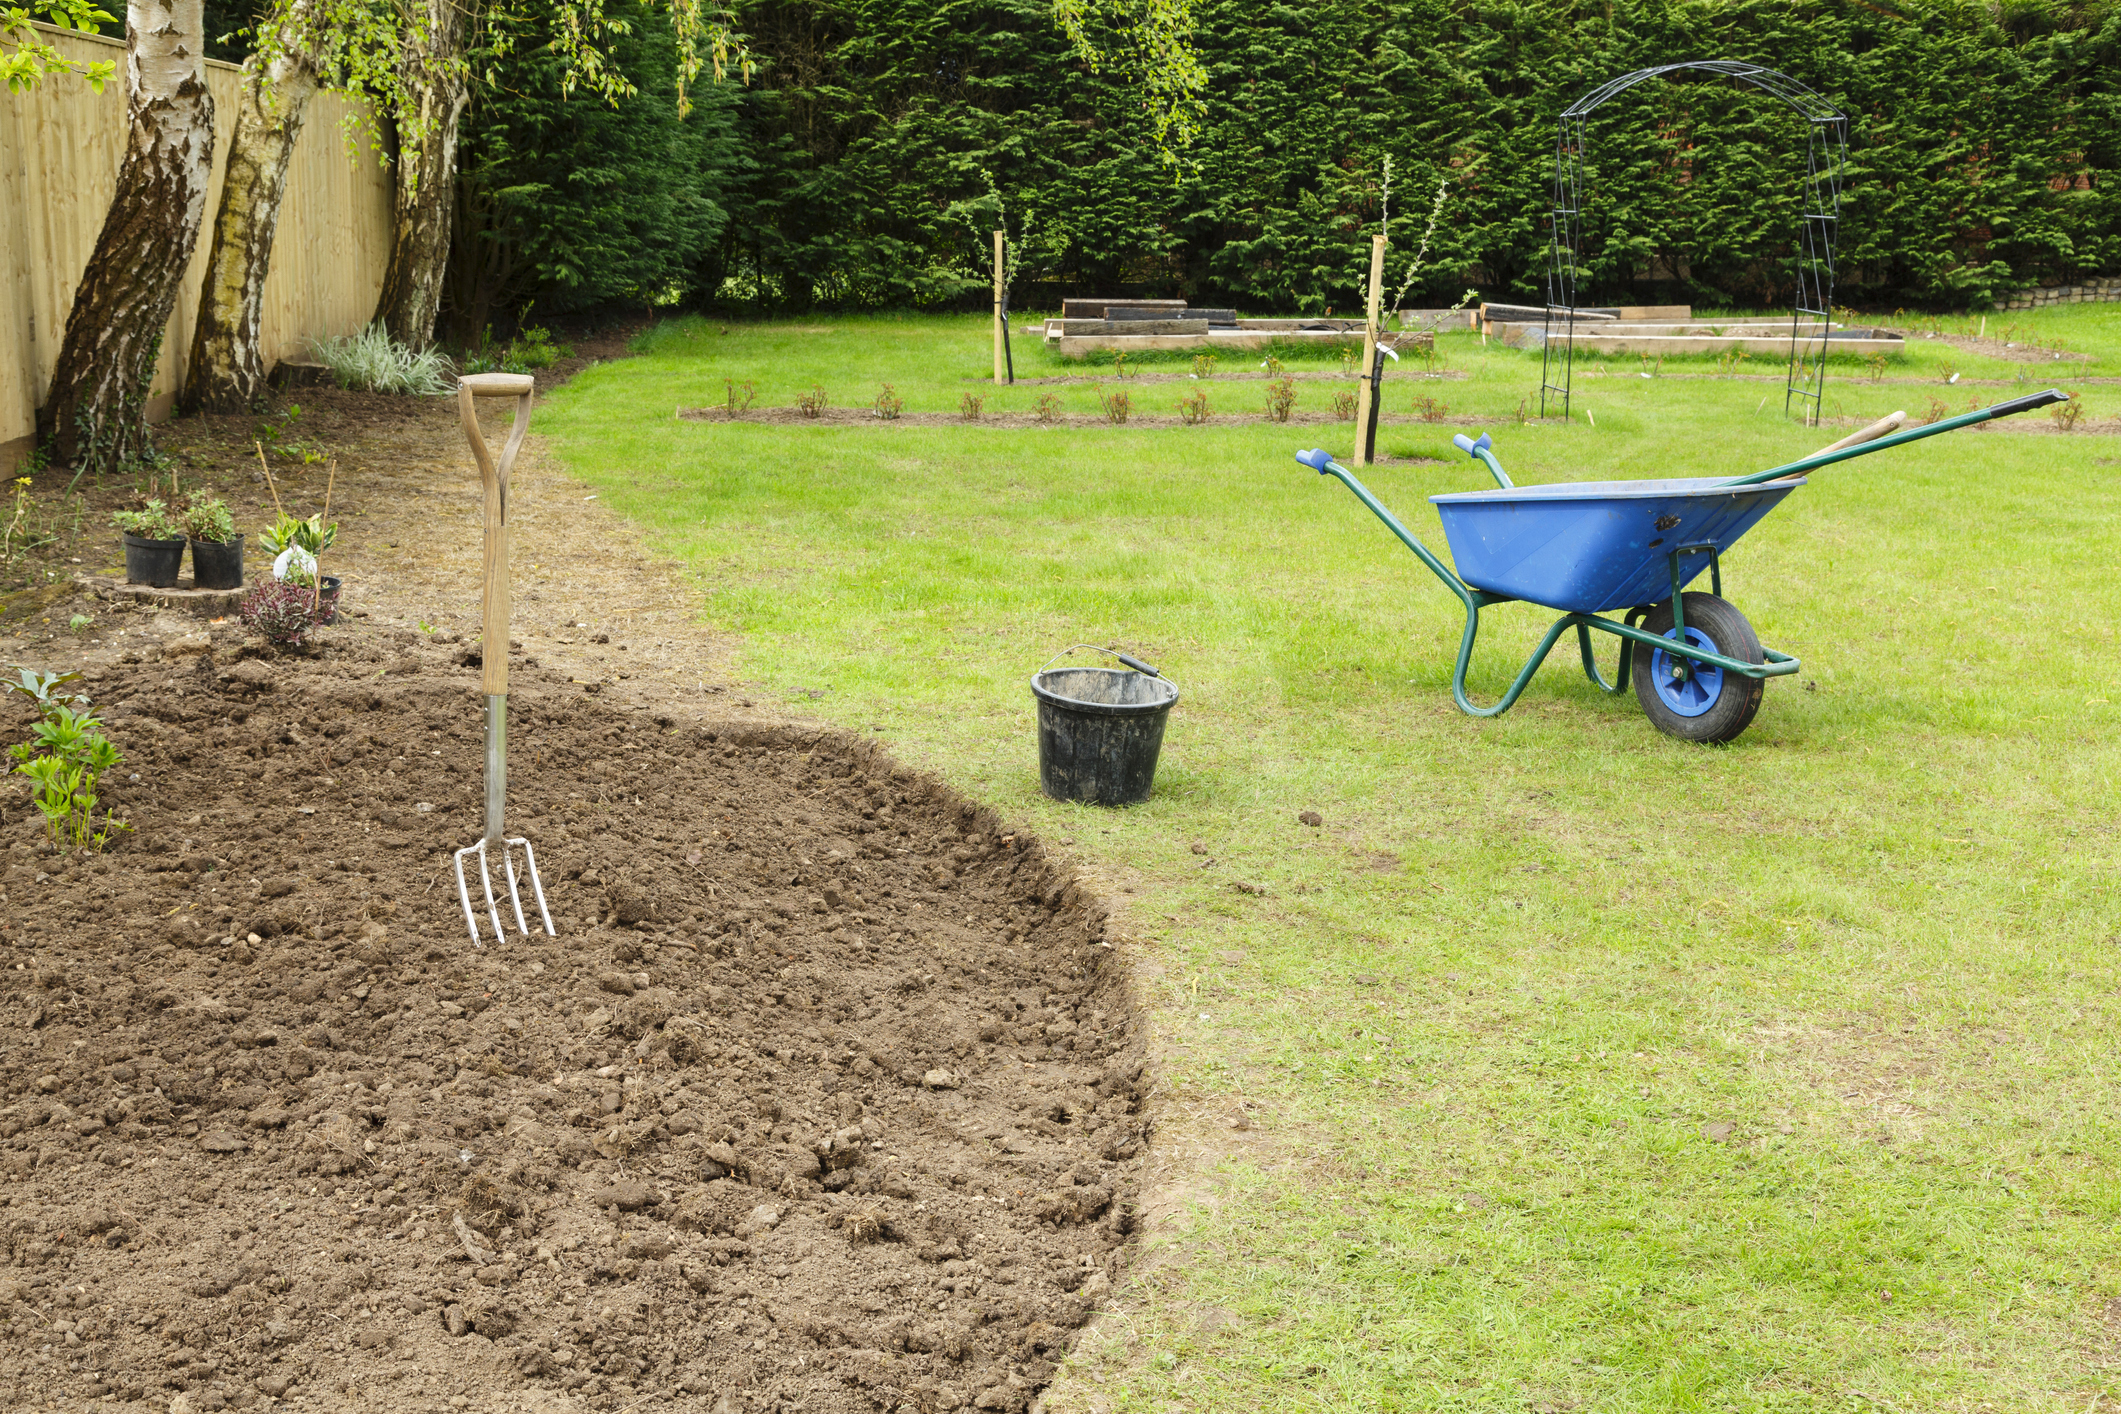 Preparing a freshly dug flower bed for planting in a garden with fork and wheelbarrow (Photo: iStock - PaulMaguire)